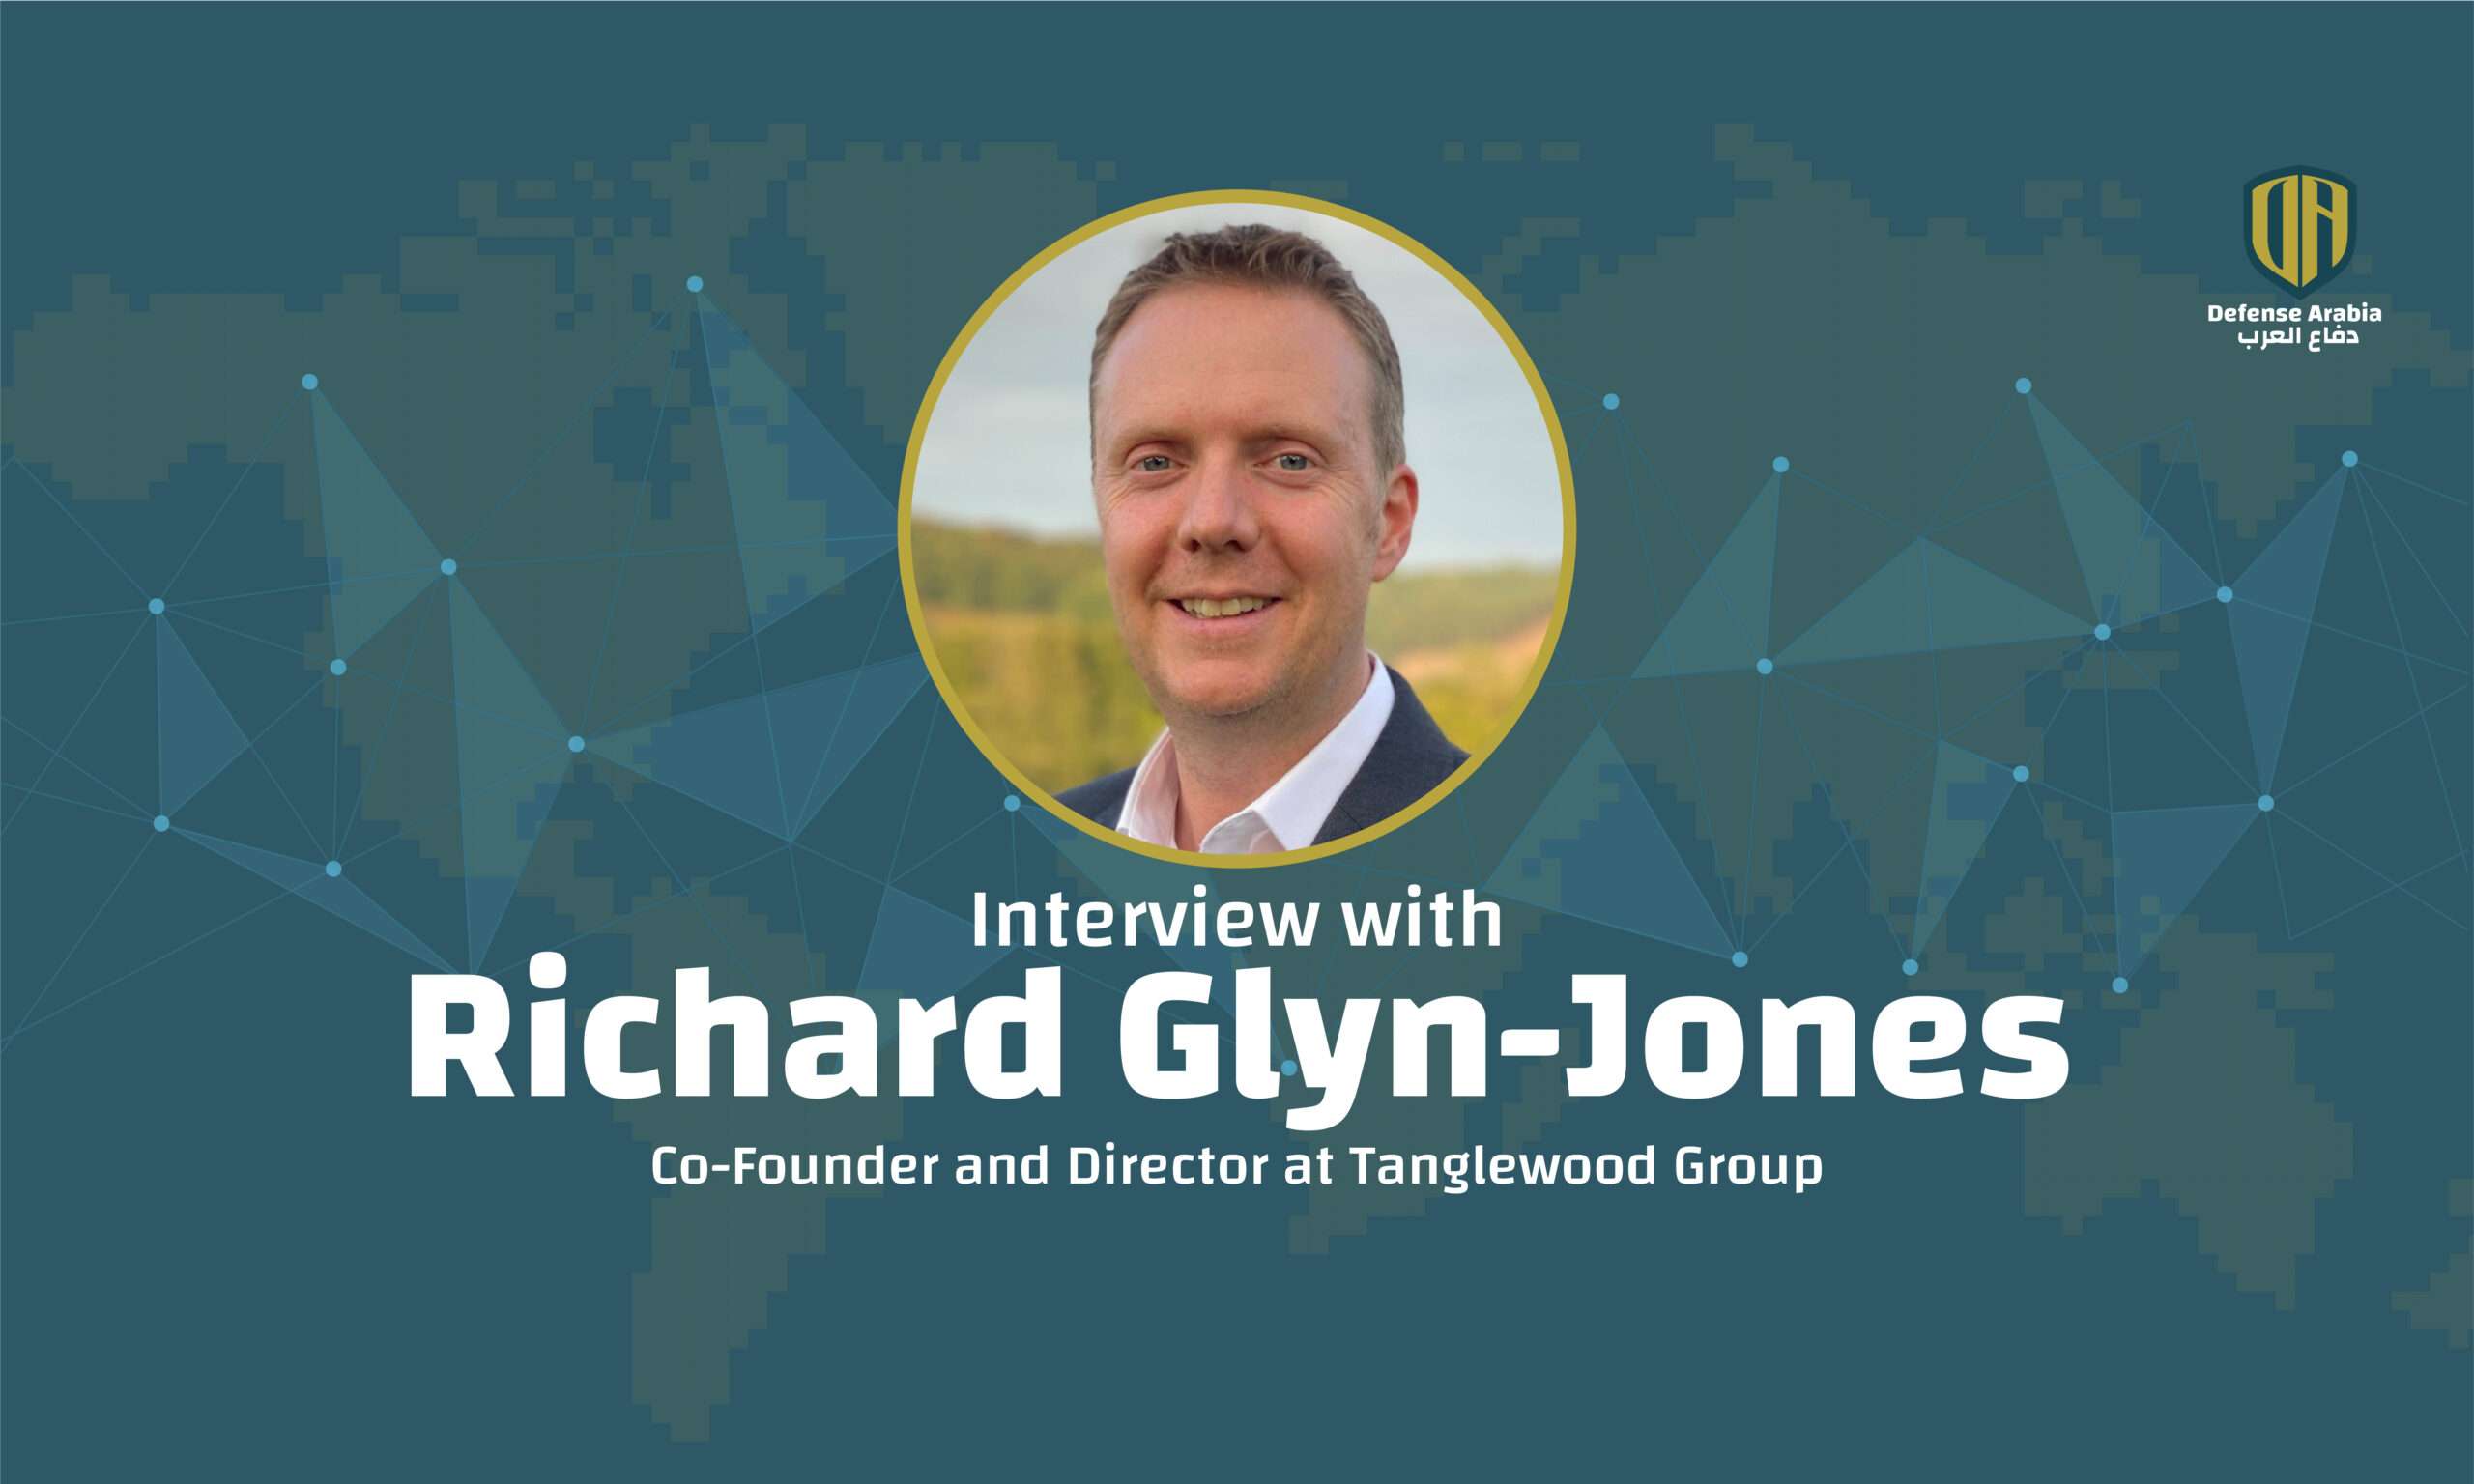 Mr. Richard Glyn-Jones Co-Founder and Director at Tanglewood Group